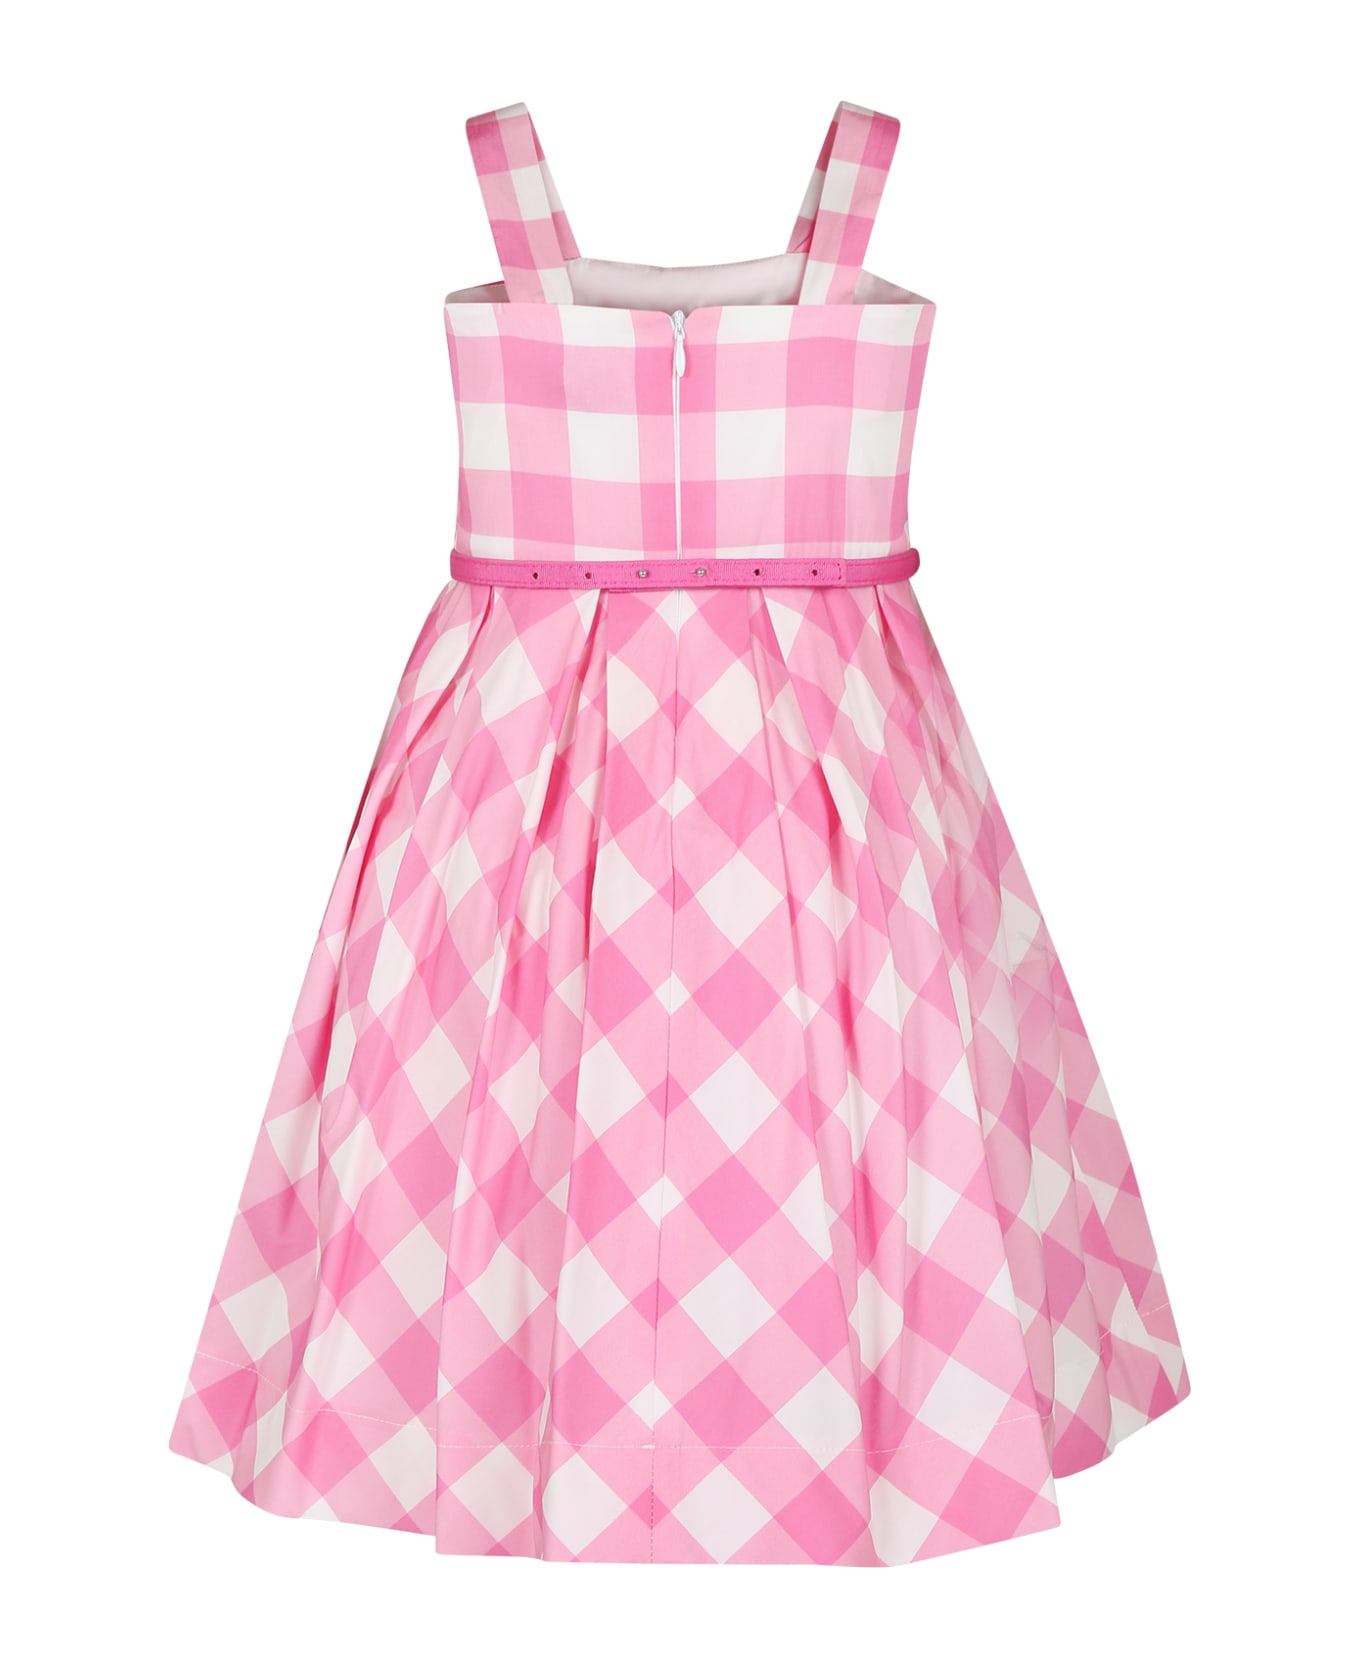 Monnalisa Pink Dress For Girl With Bow And Vichy Print - Multicolor